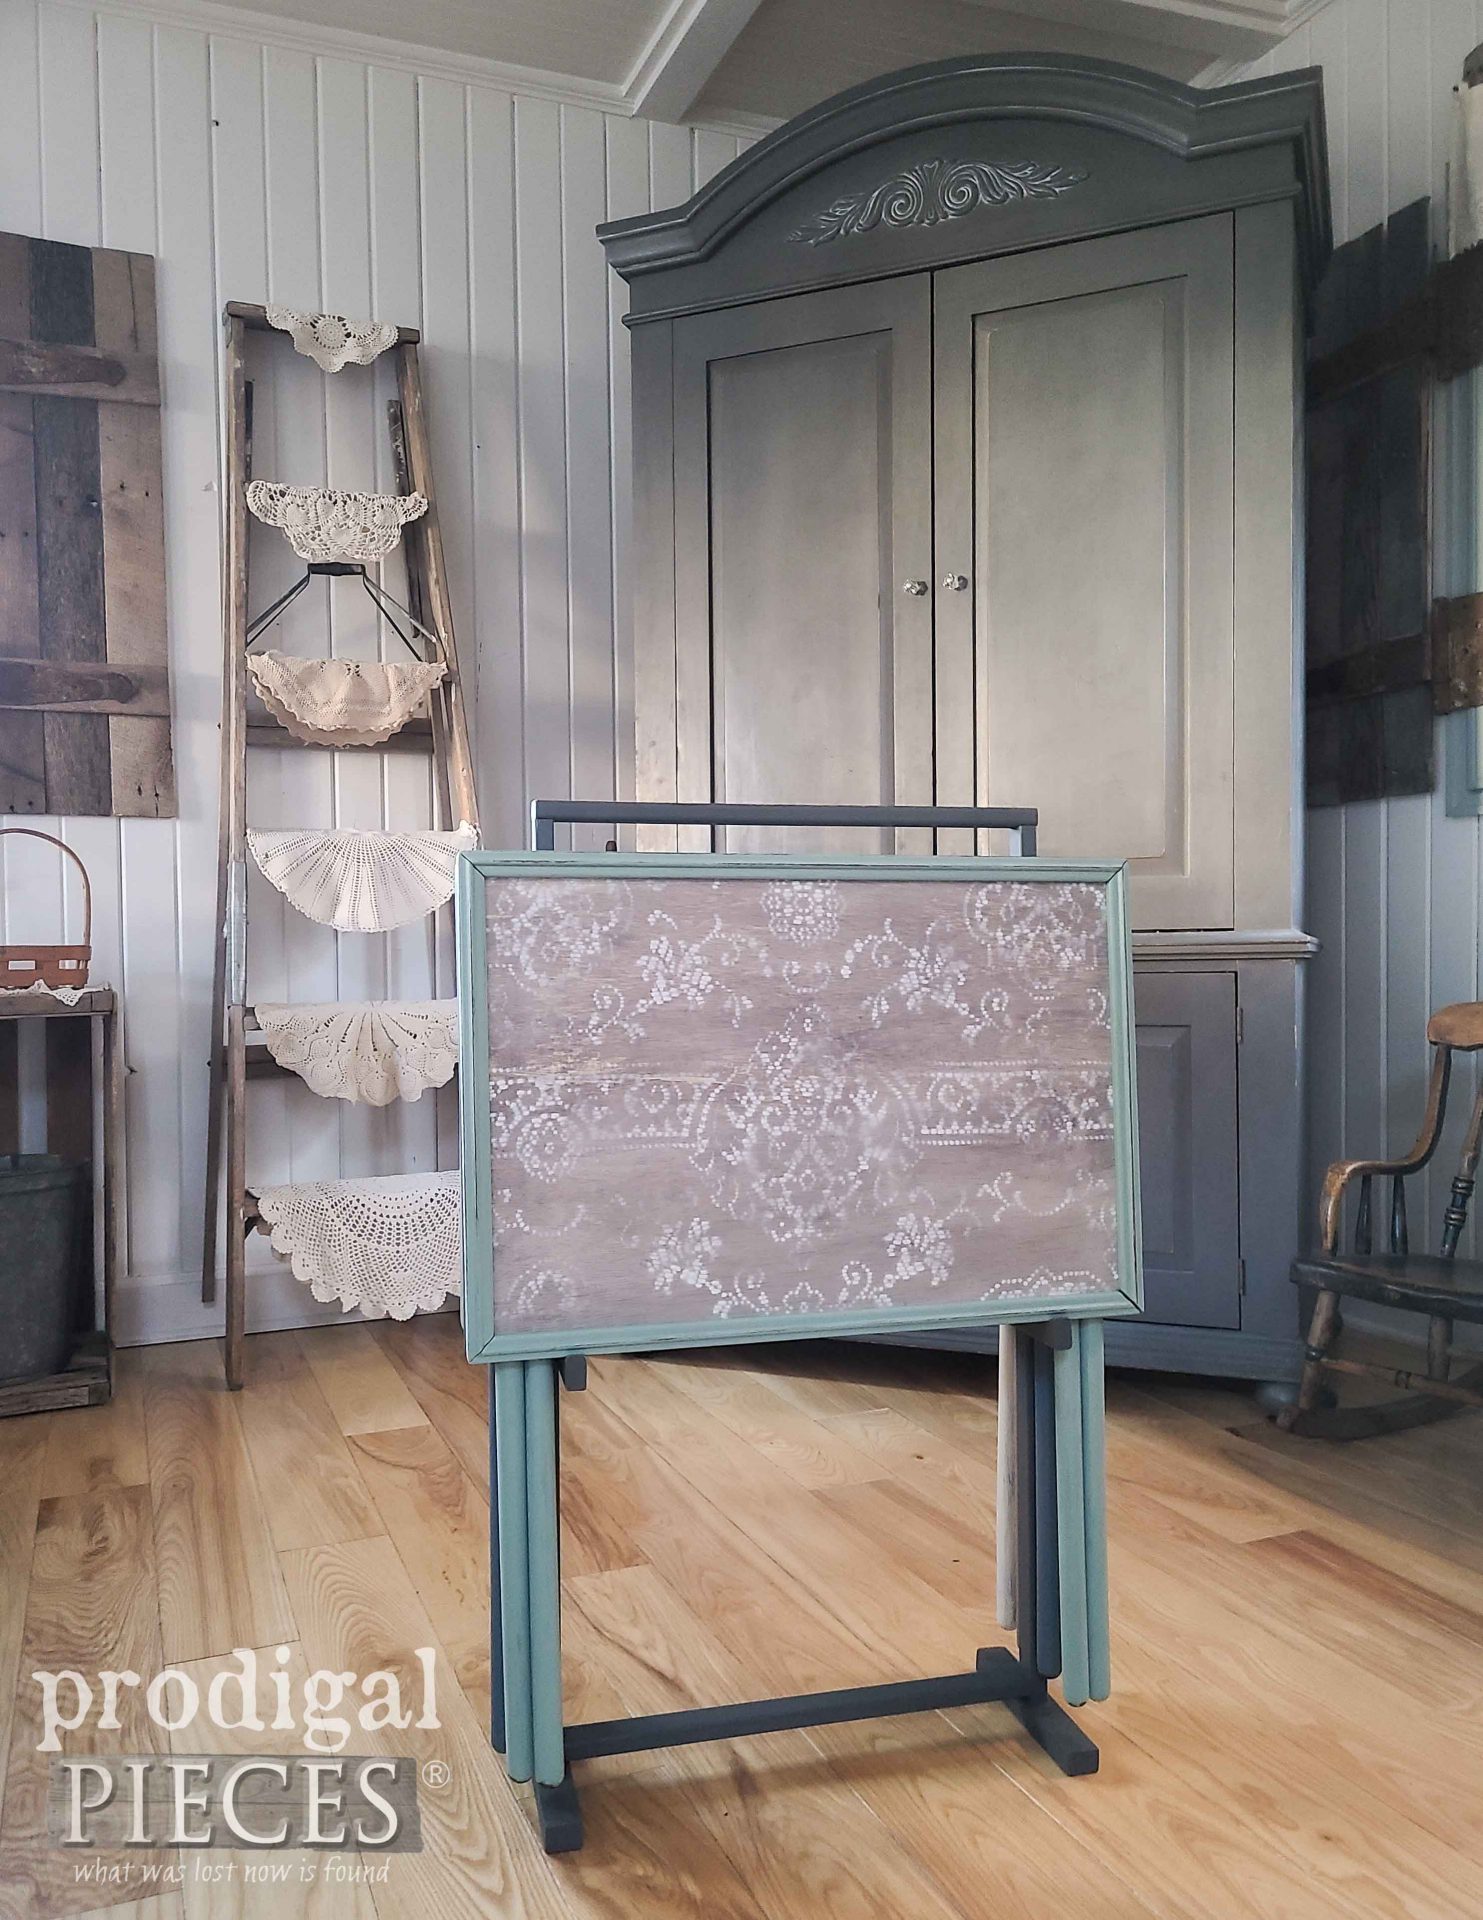 Set of Vintage TV Trays with Stand Refreshed by Larissa of Prodigal Pieces | prodigalpieces.com #prodigalpieces #furniture #diy #home #vintage